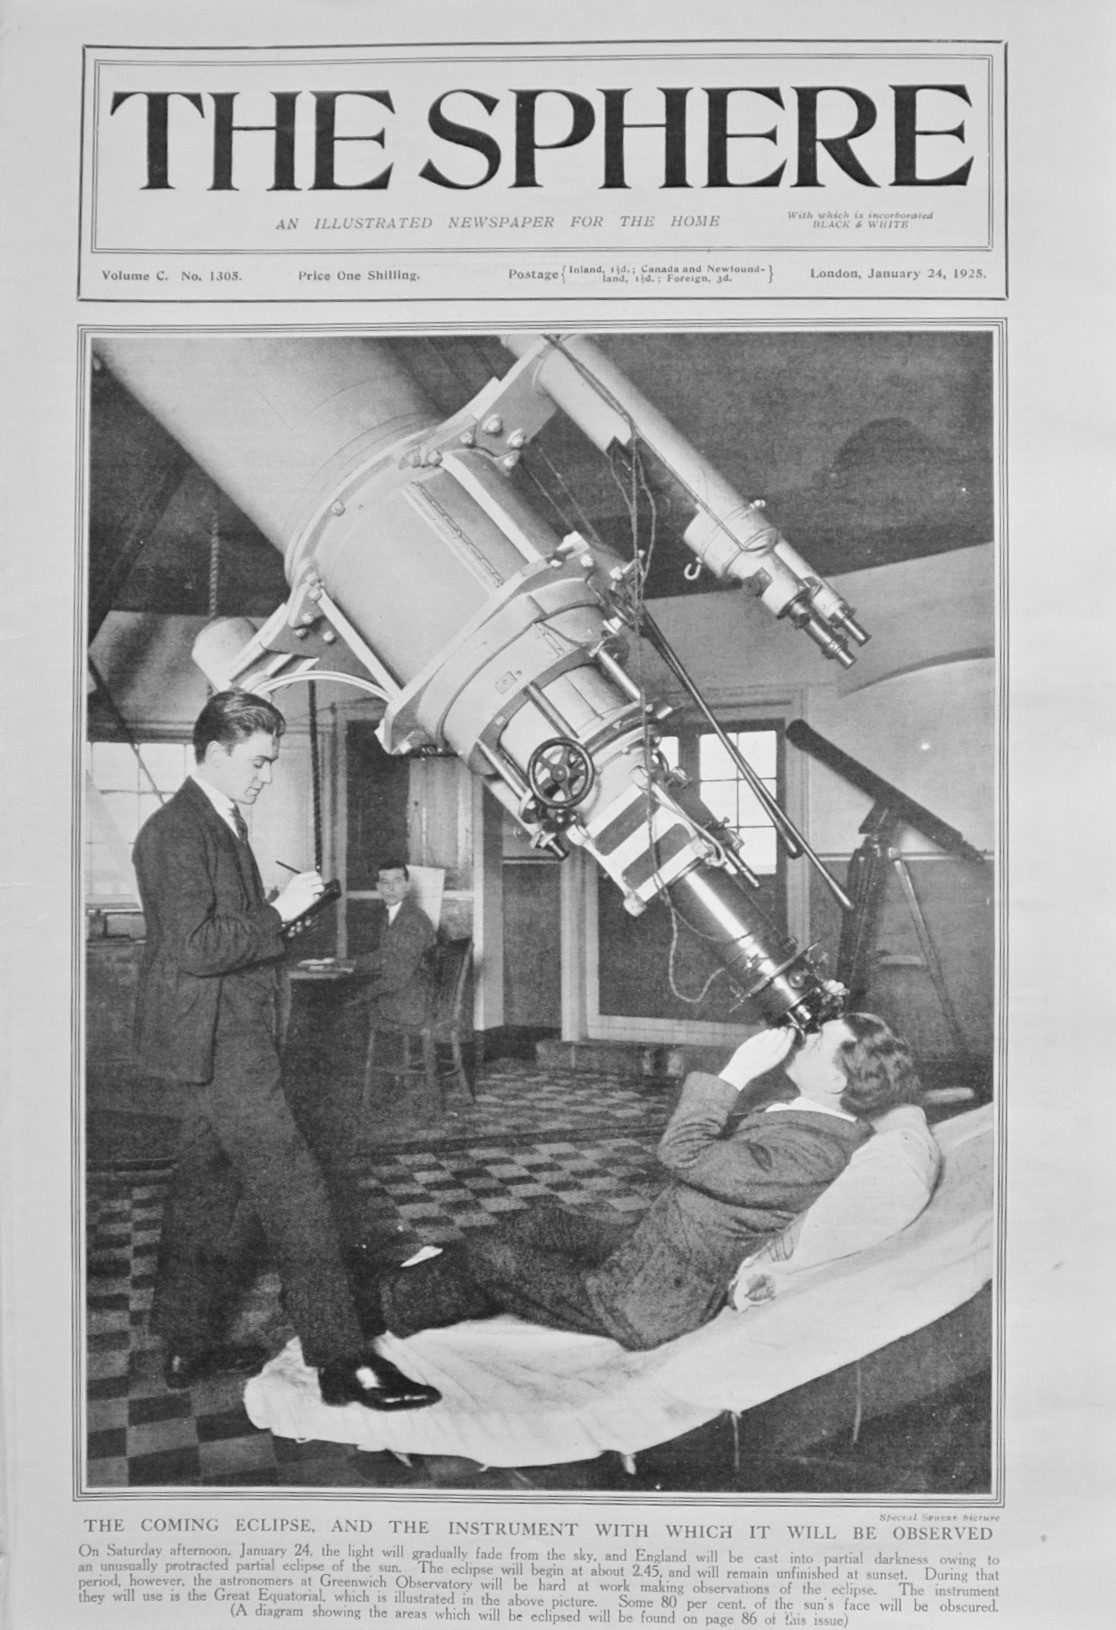 The Sphere - January 24, 1925